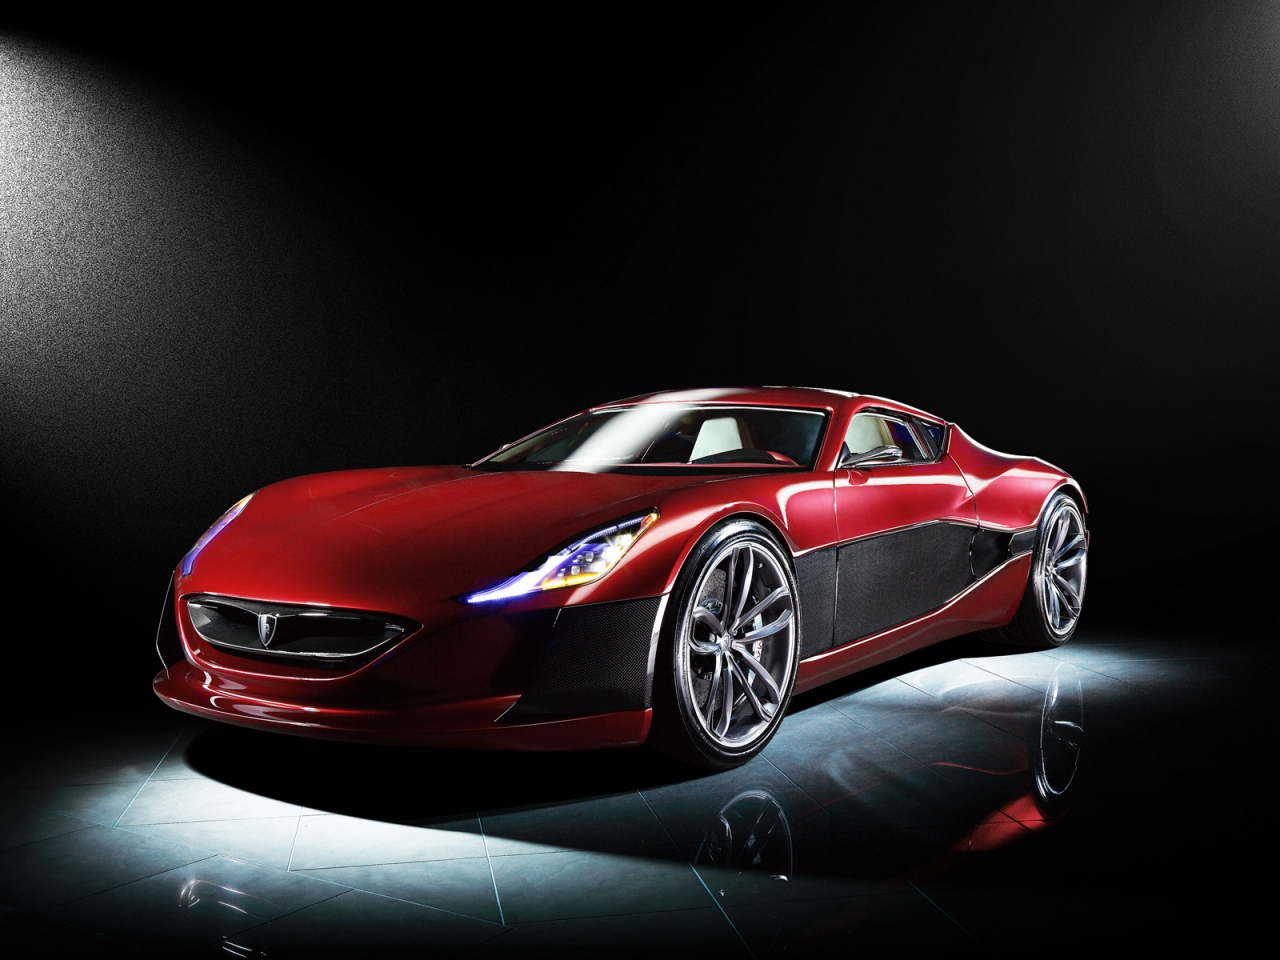 Rimac Concept One for 1280 x 960 resolution